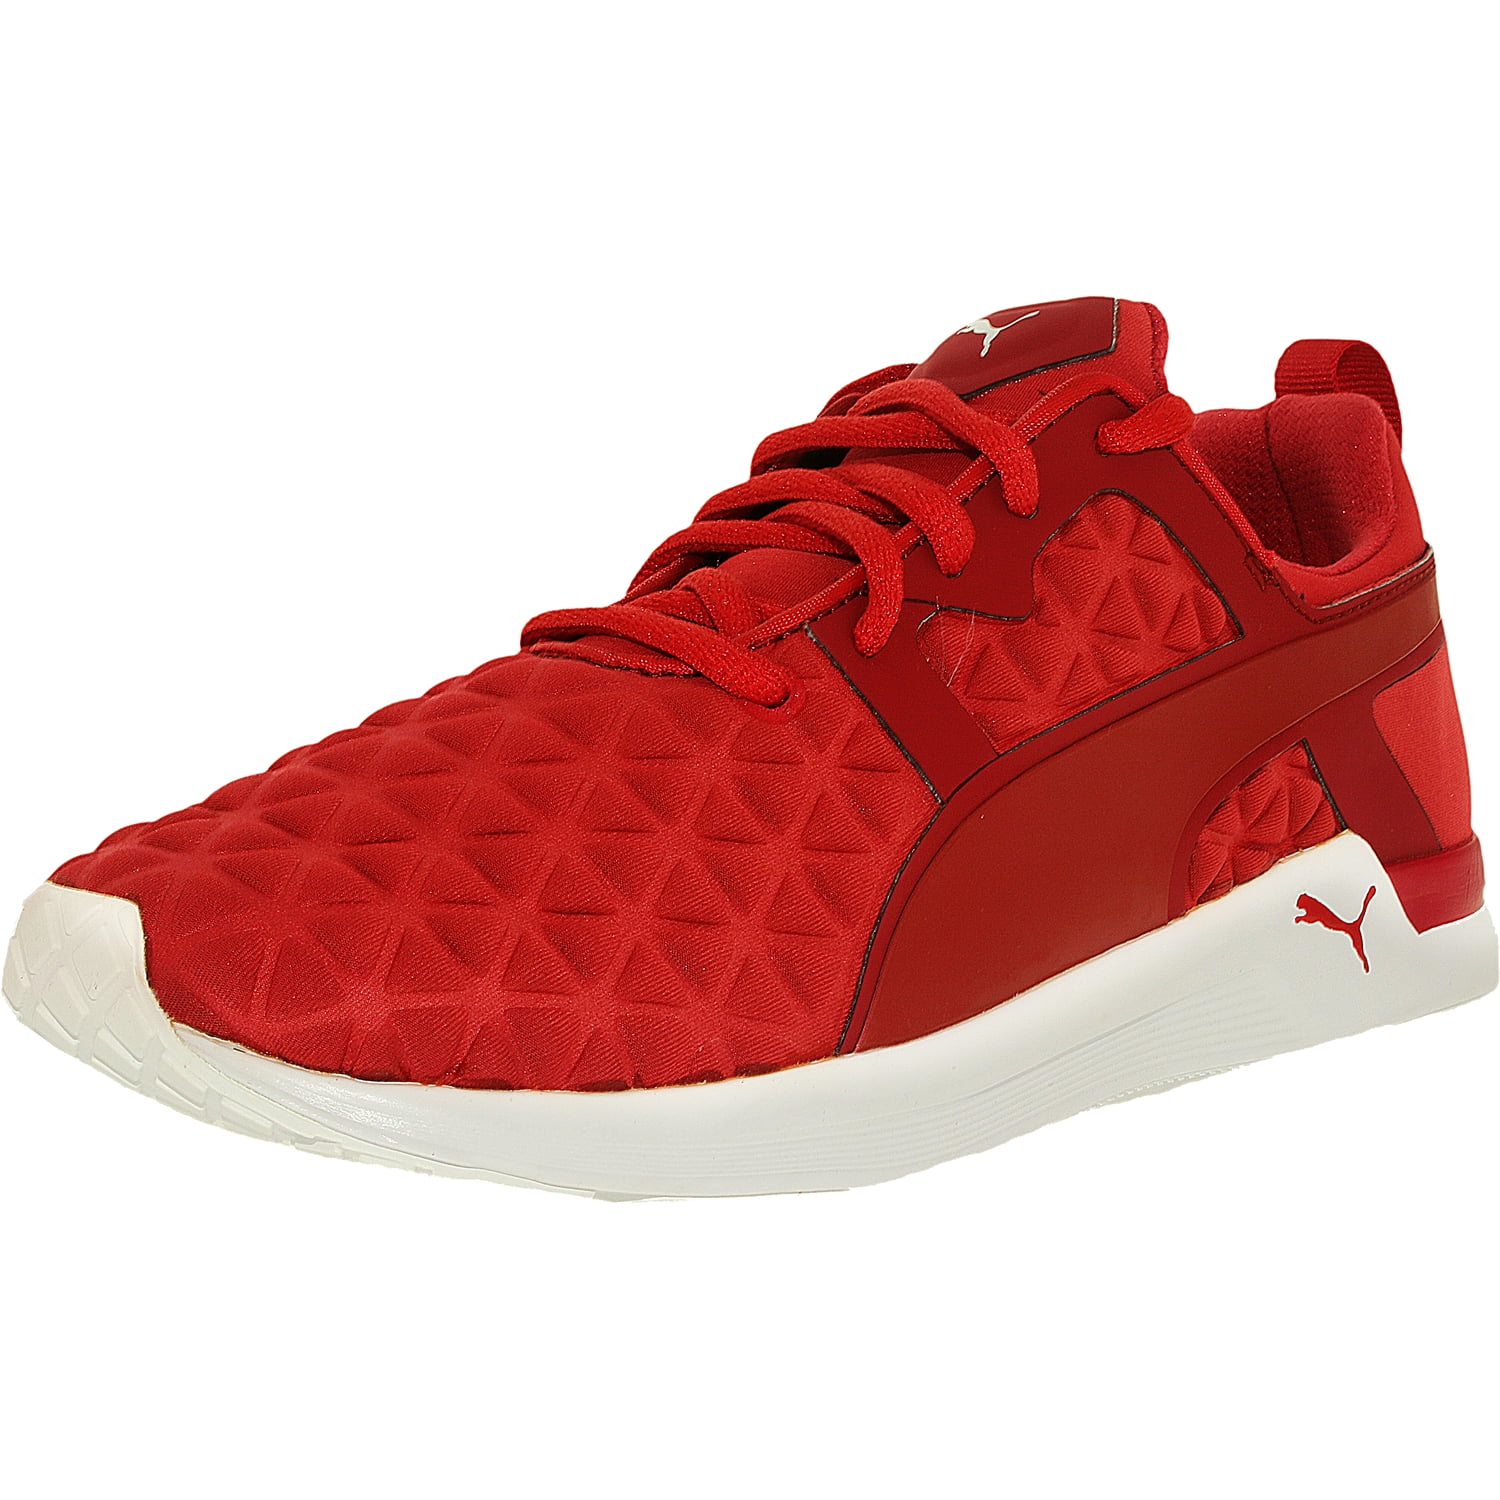 puma red ankle shoes